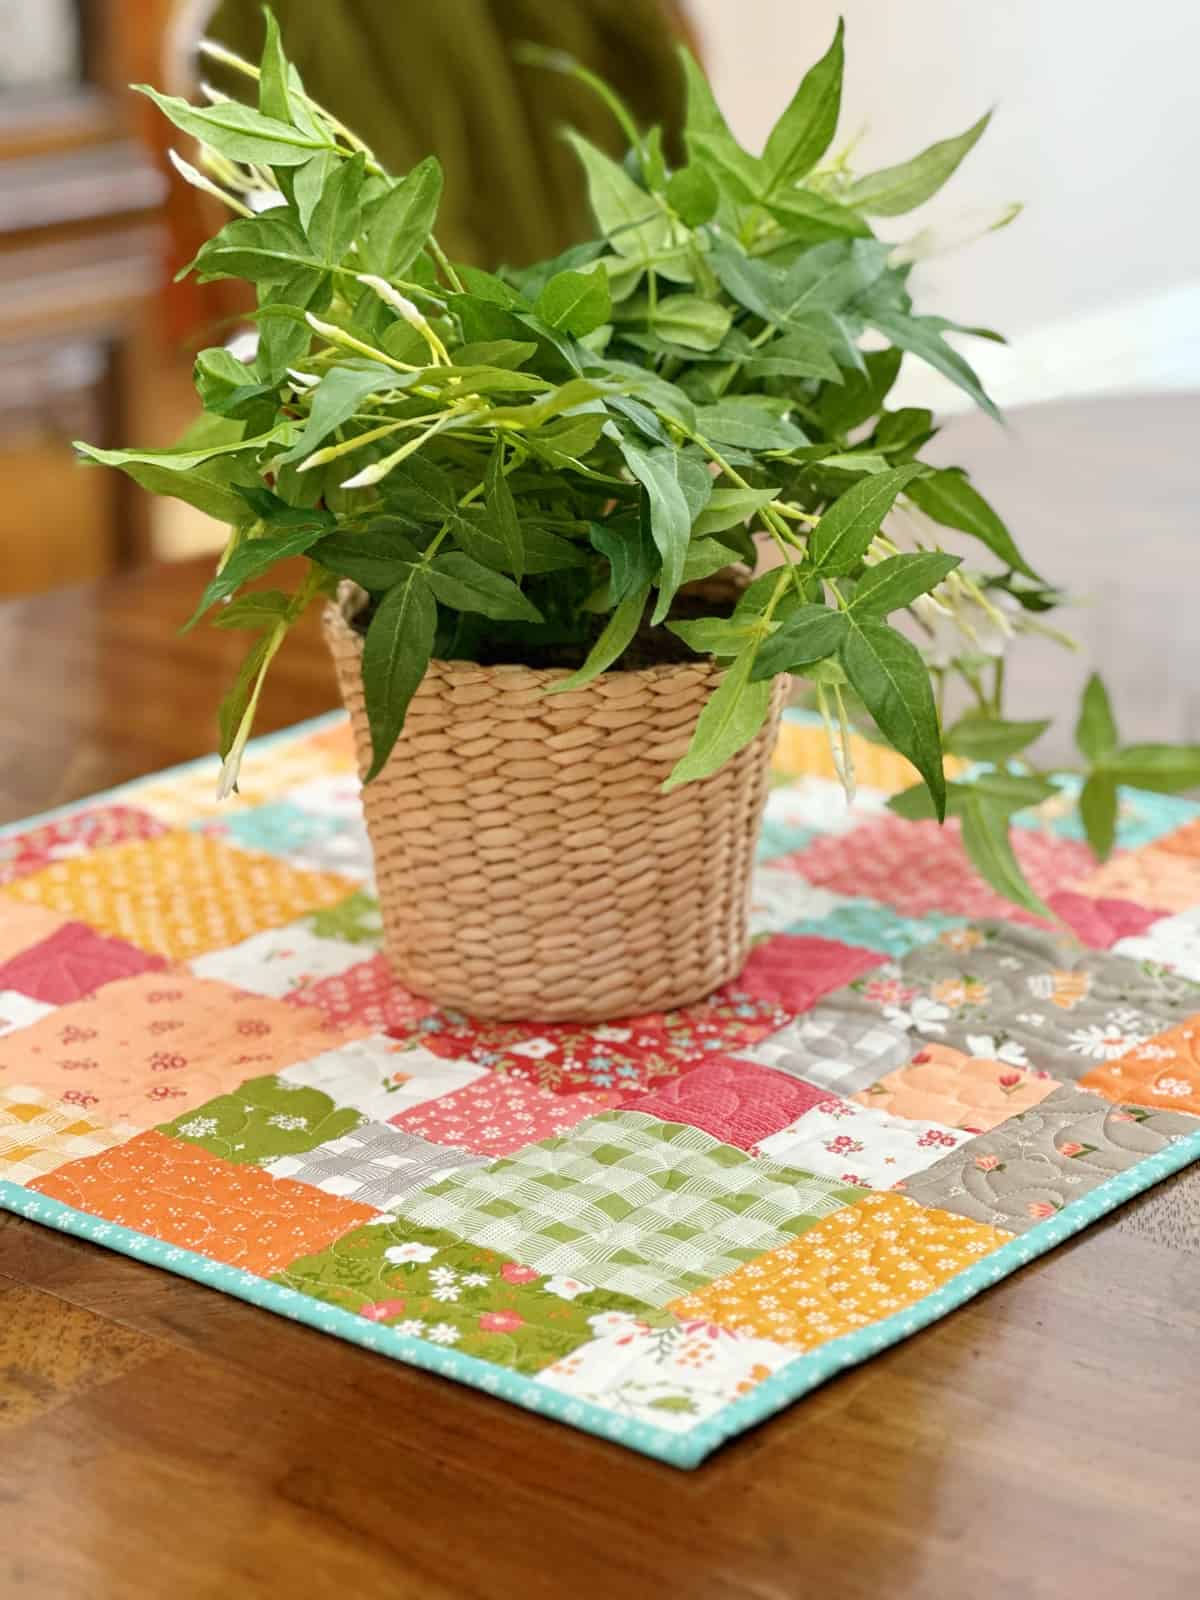 patchwork quilted table topper with plant on table